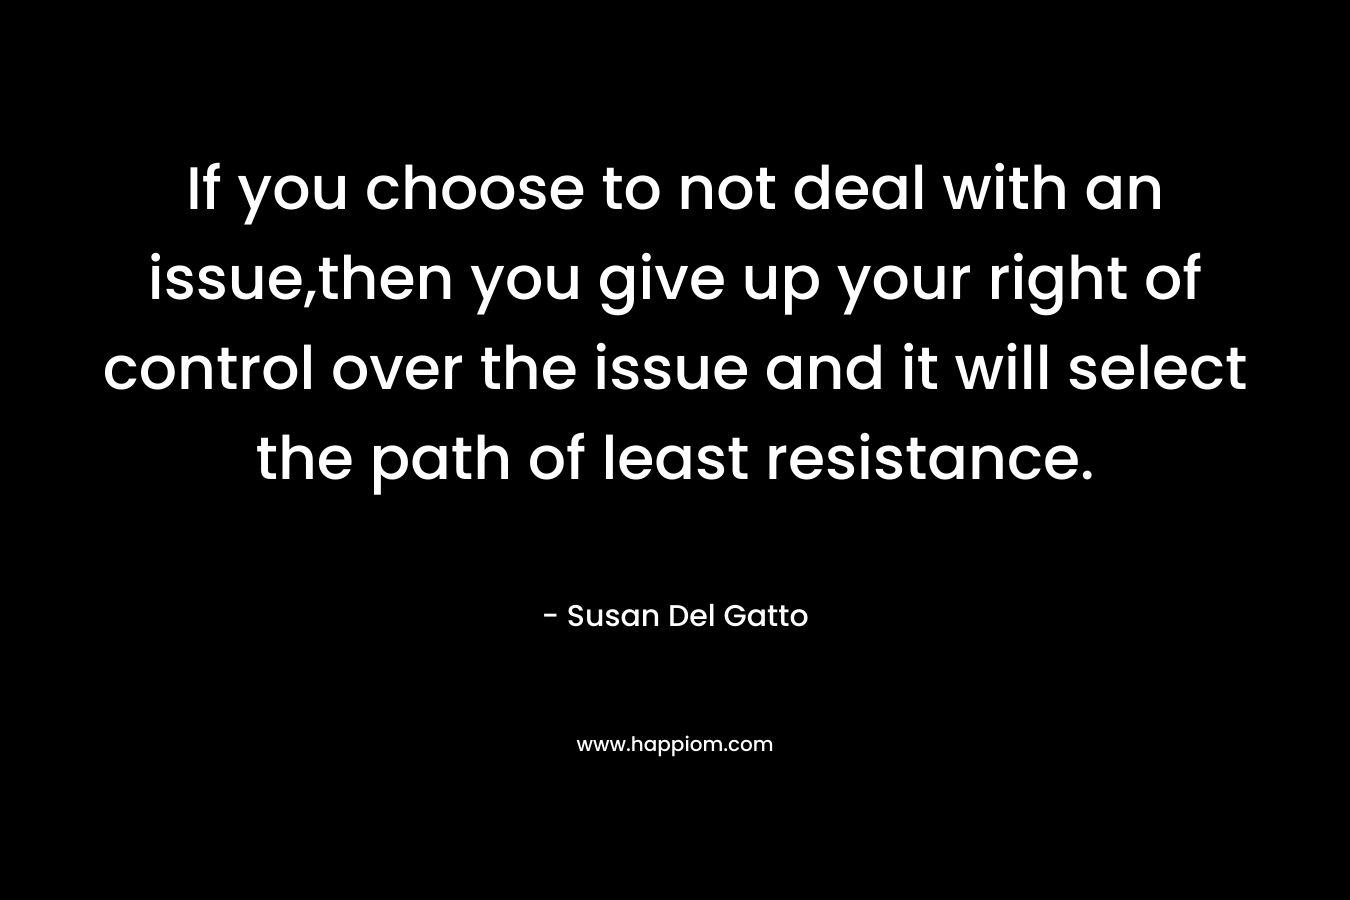 If you choose to not deal with an issue,then you give up your right of control over the issue and it will select the path of least resistance. – Susan Del Gatto